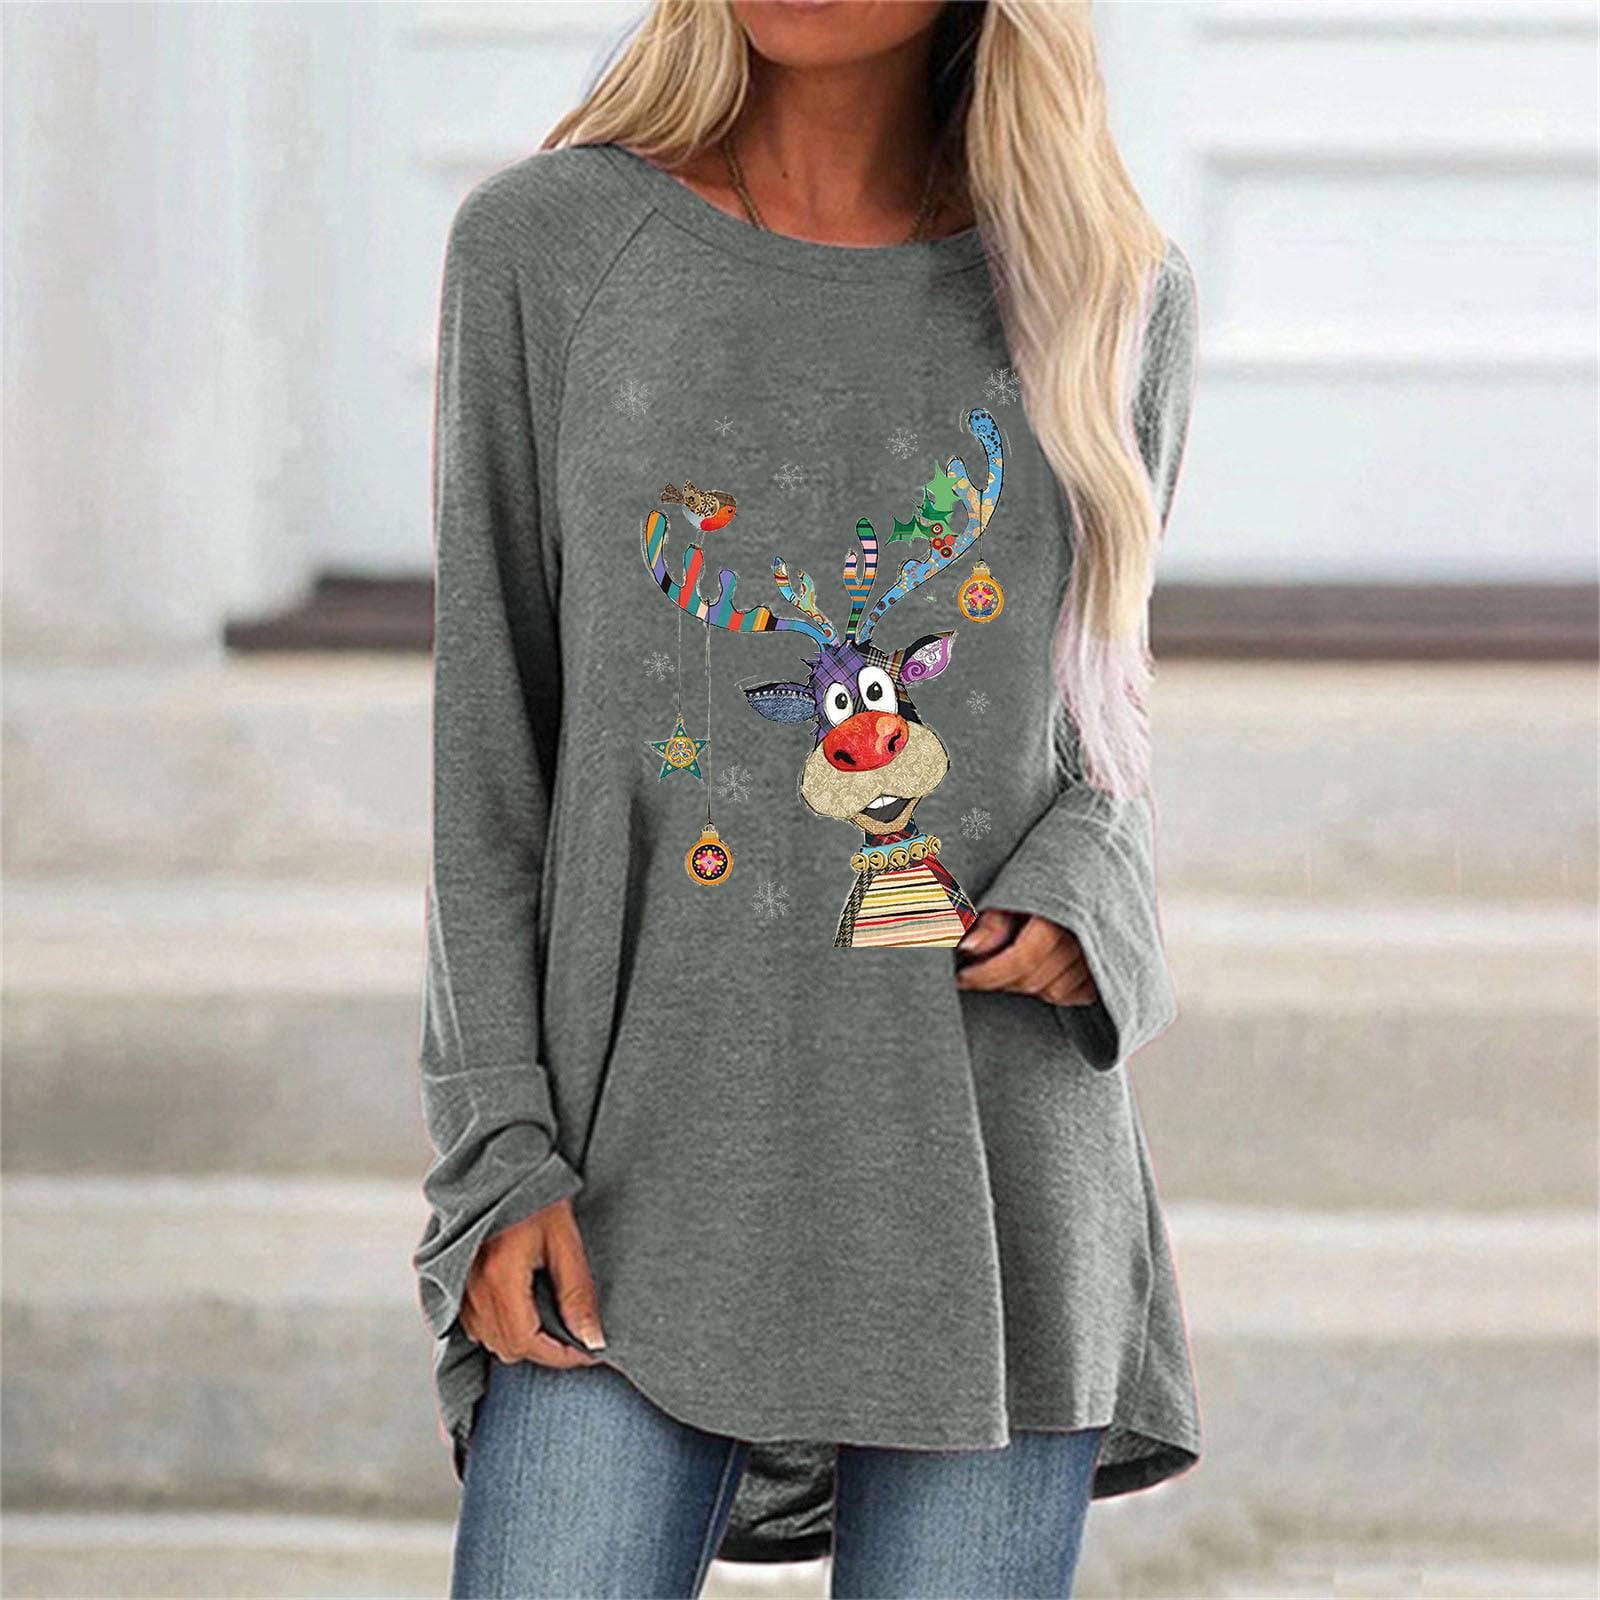 Christmas Clothing Bauble with Lines Print Lady Casual T Shirt Tops 